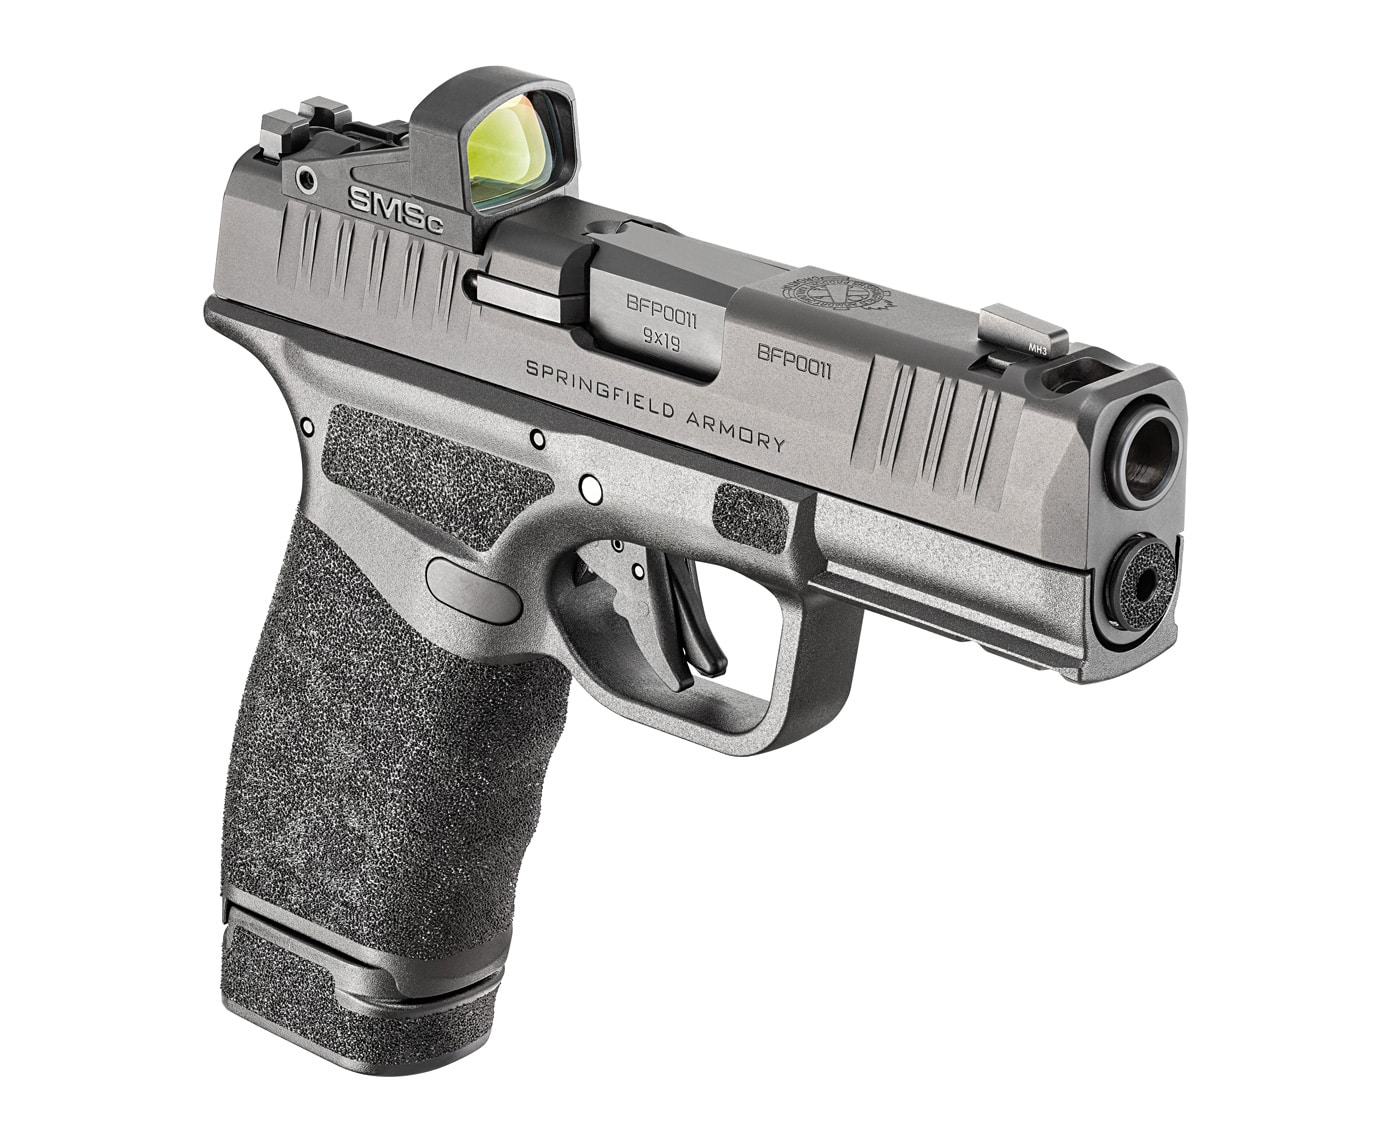 This is the Springfield Armory Hellcat Pro Comp is ideal for self-defense — capable for both concealed carry and for home protection. Springfield Armory Hellcat Pro 9mm semi-automatic pistol